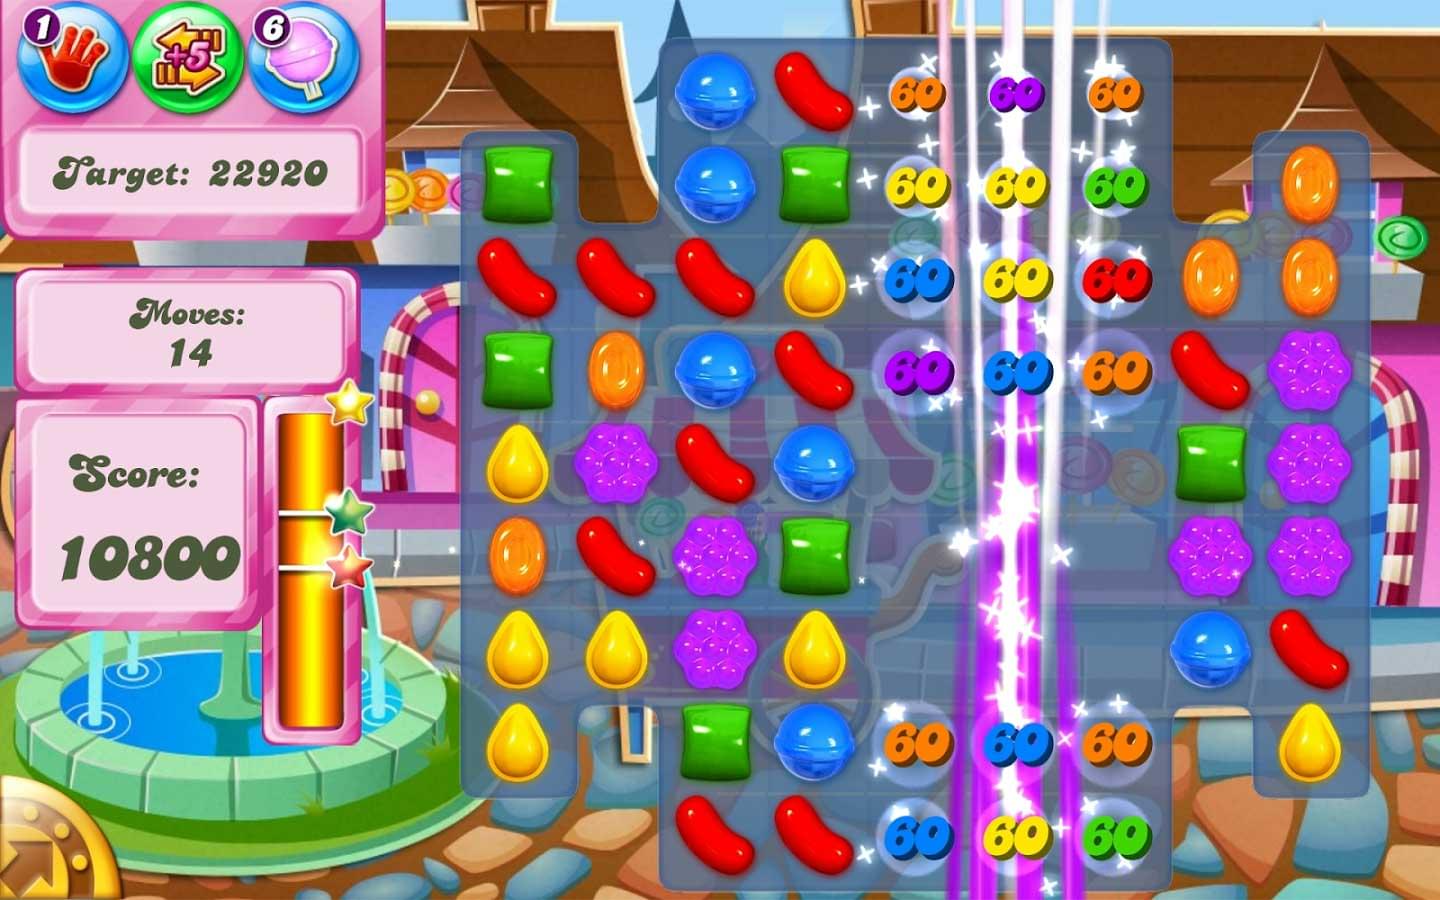 The Candy Crush game user interface presenting a skeuomorphic design approach